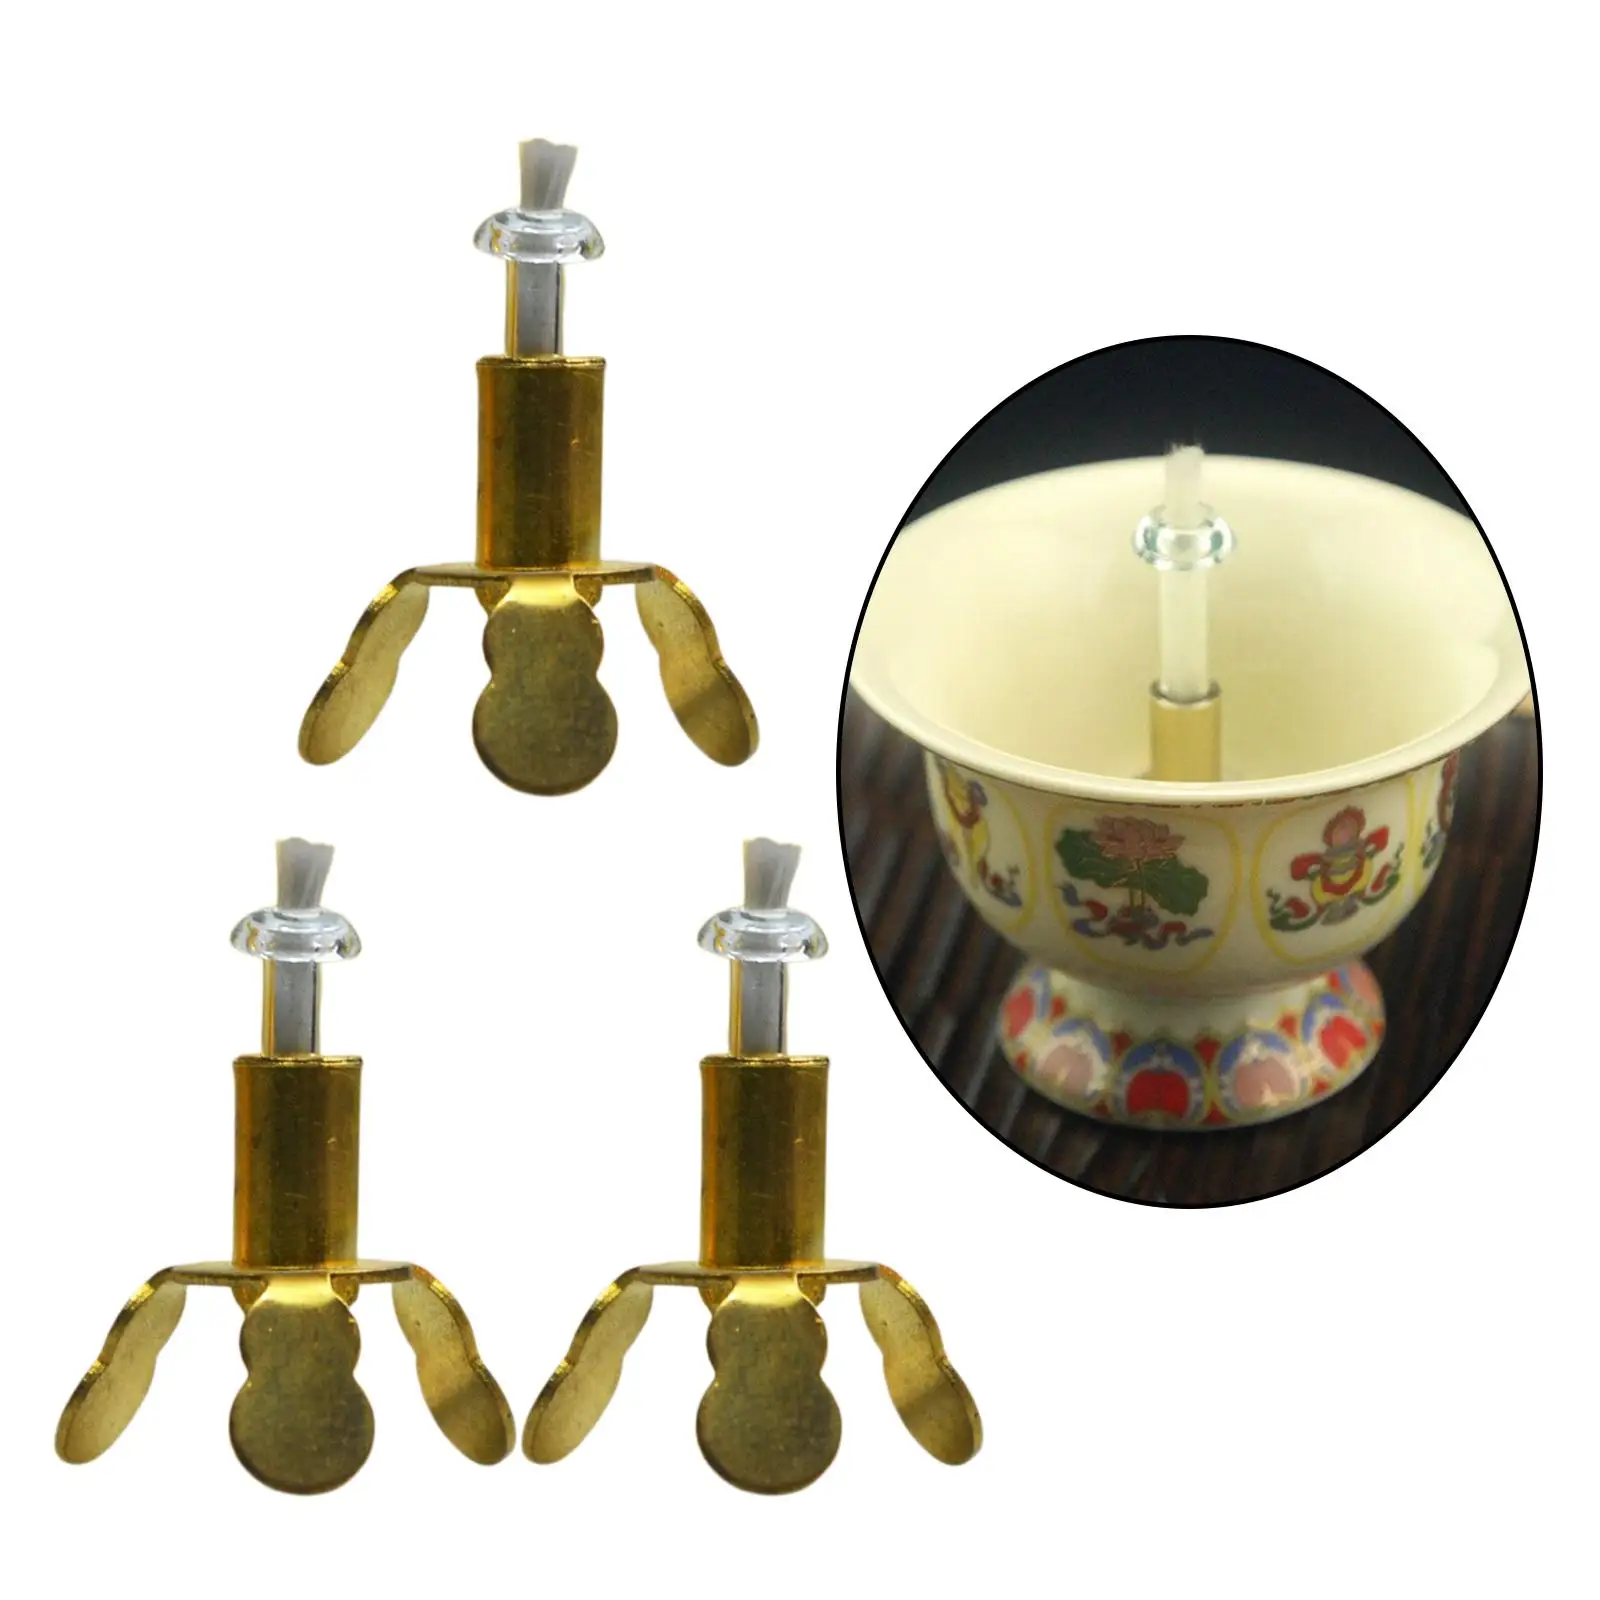 3Pcs Oil Lamp Wick Holder Copper Alloy Stand Shelf with Wicks for Homemade Proposal Wedding DIY Oil Lamp Long Light Accessories